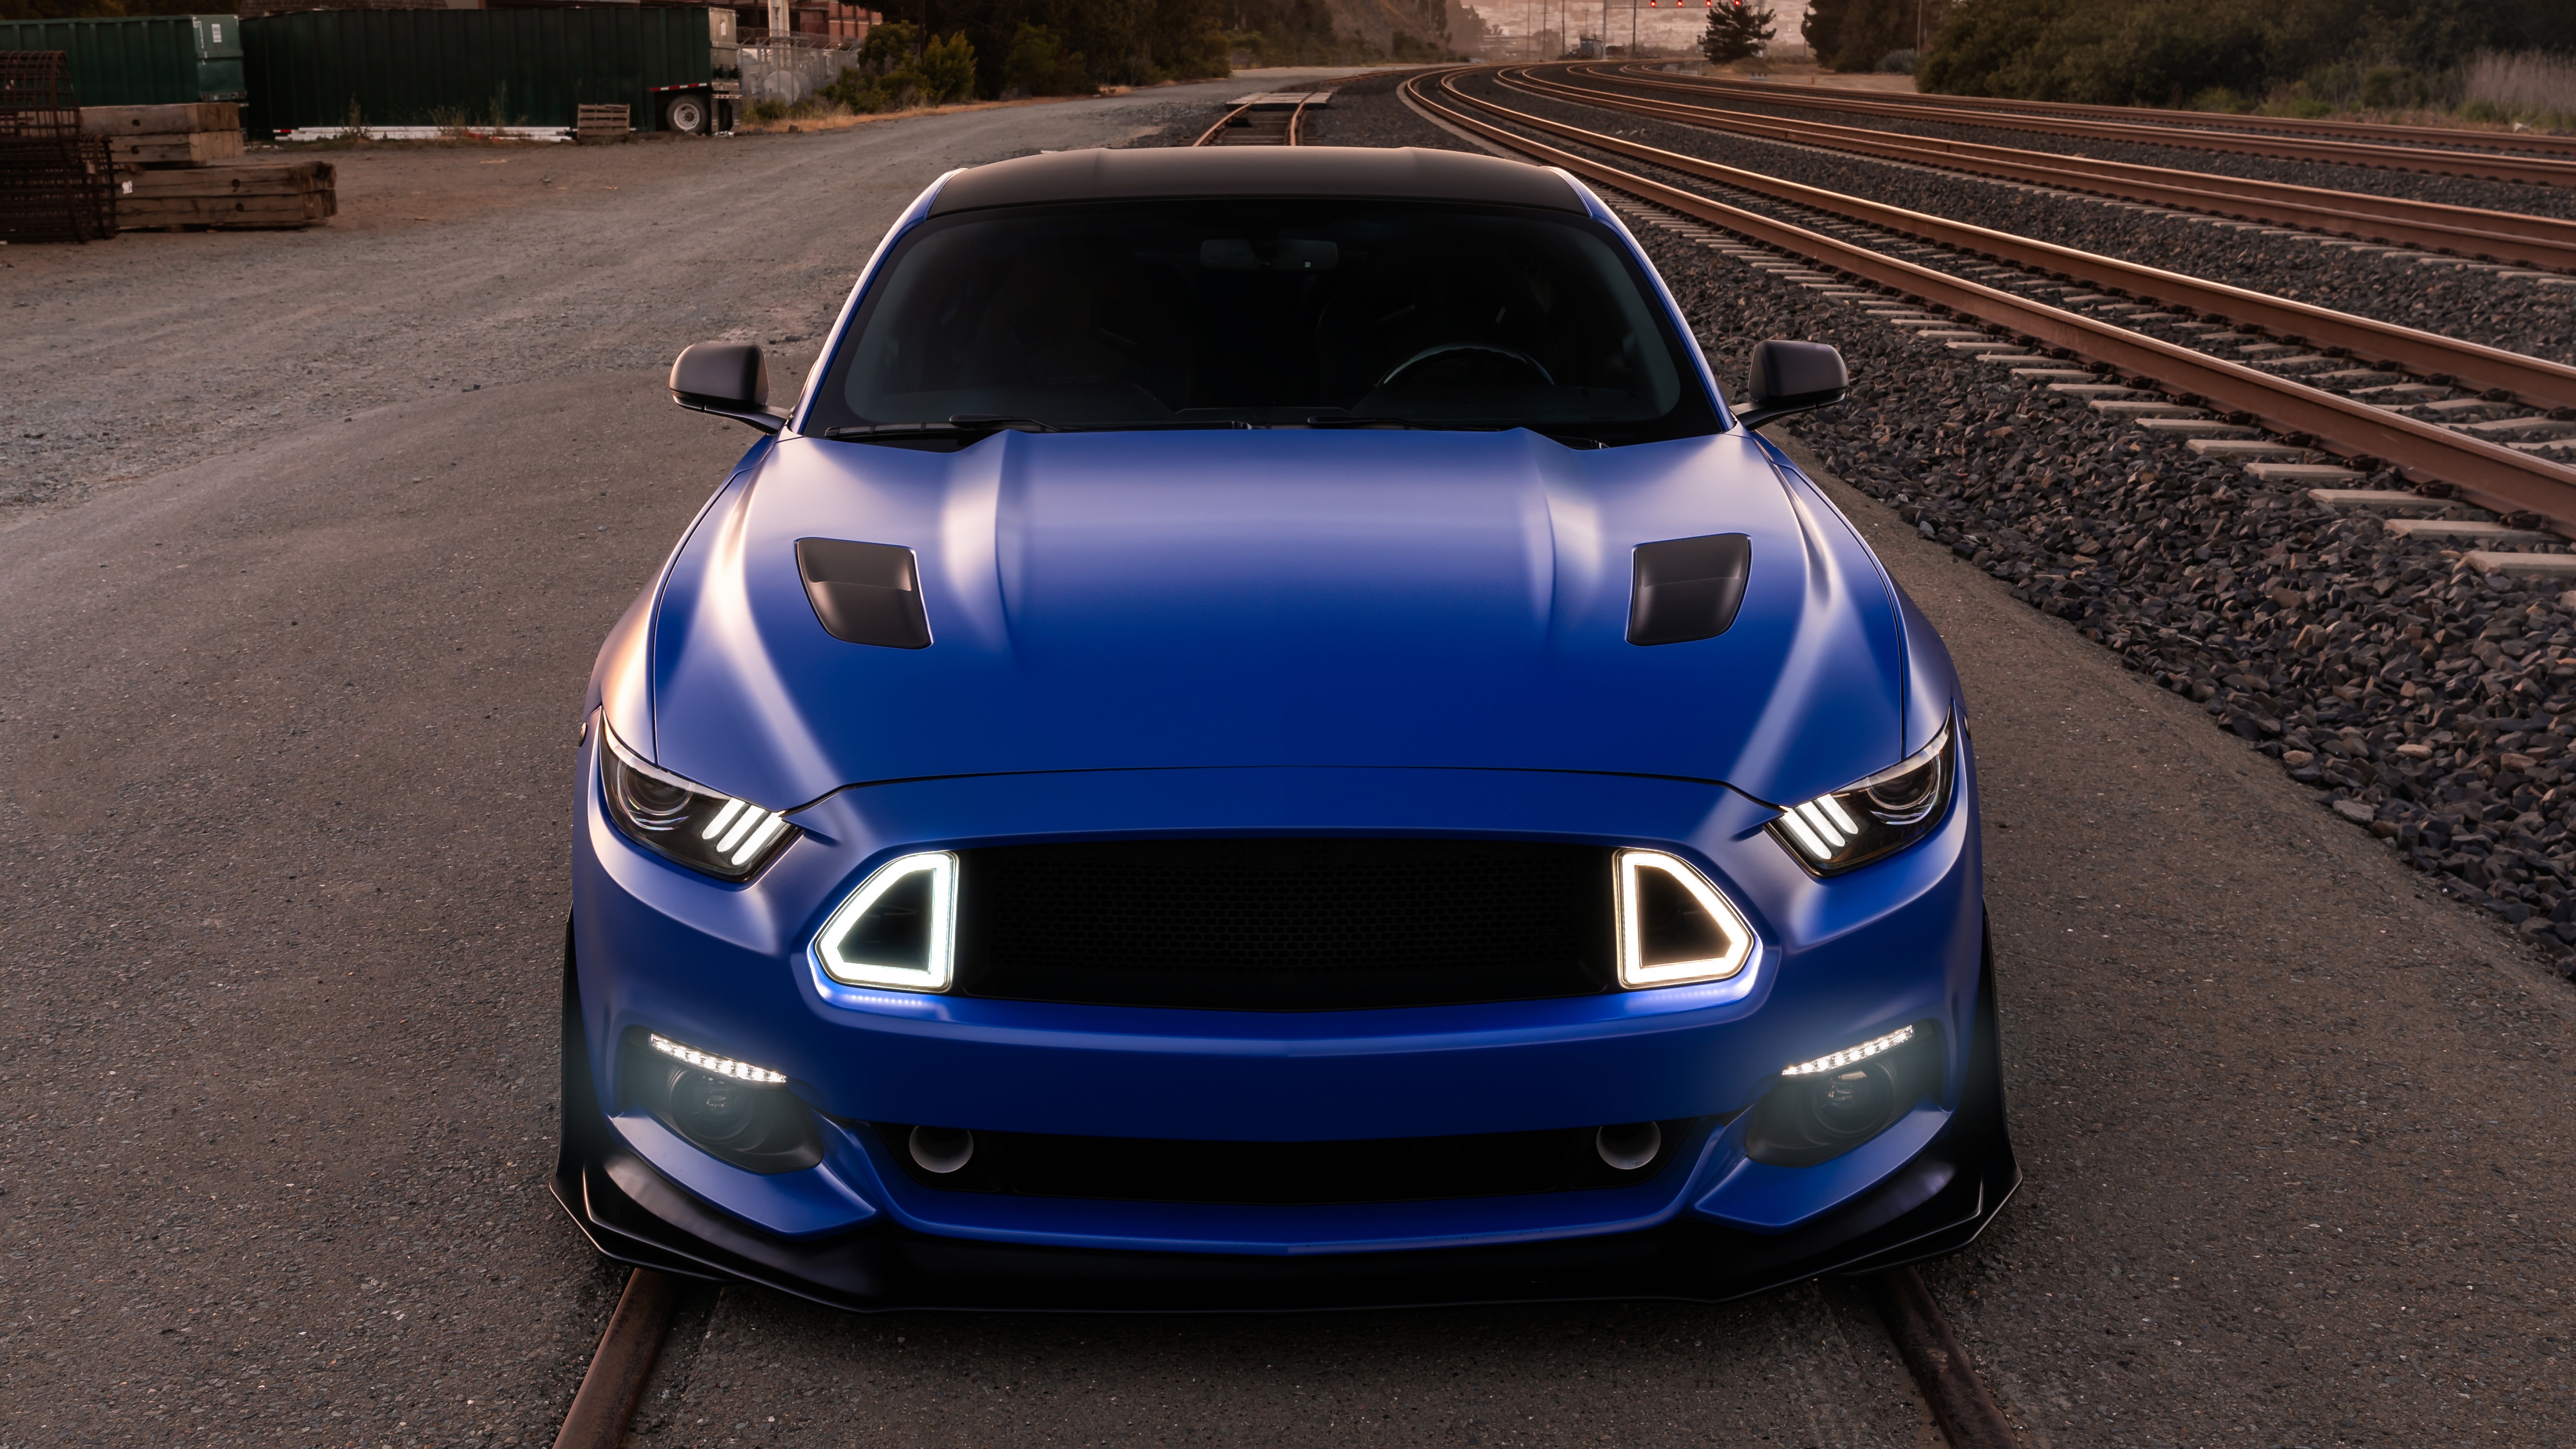 Ford Mustang GT Wallpaper 4K, Muscle sports cars, 5K, Cars, #9826